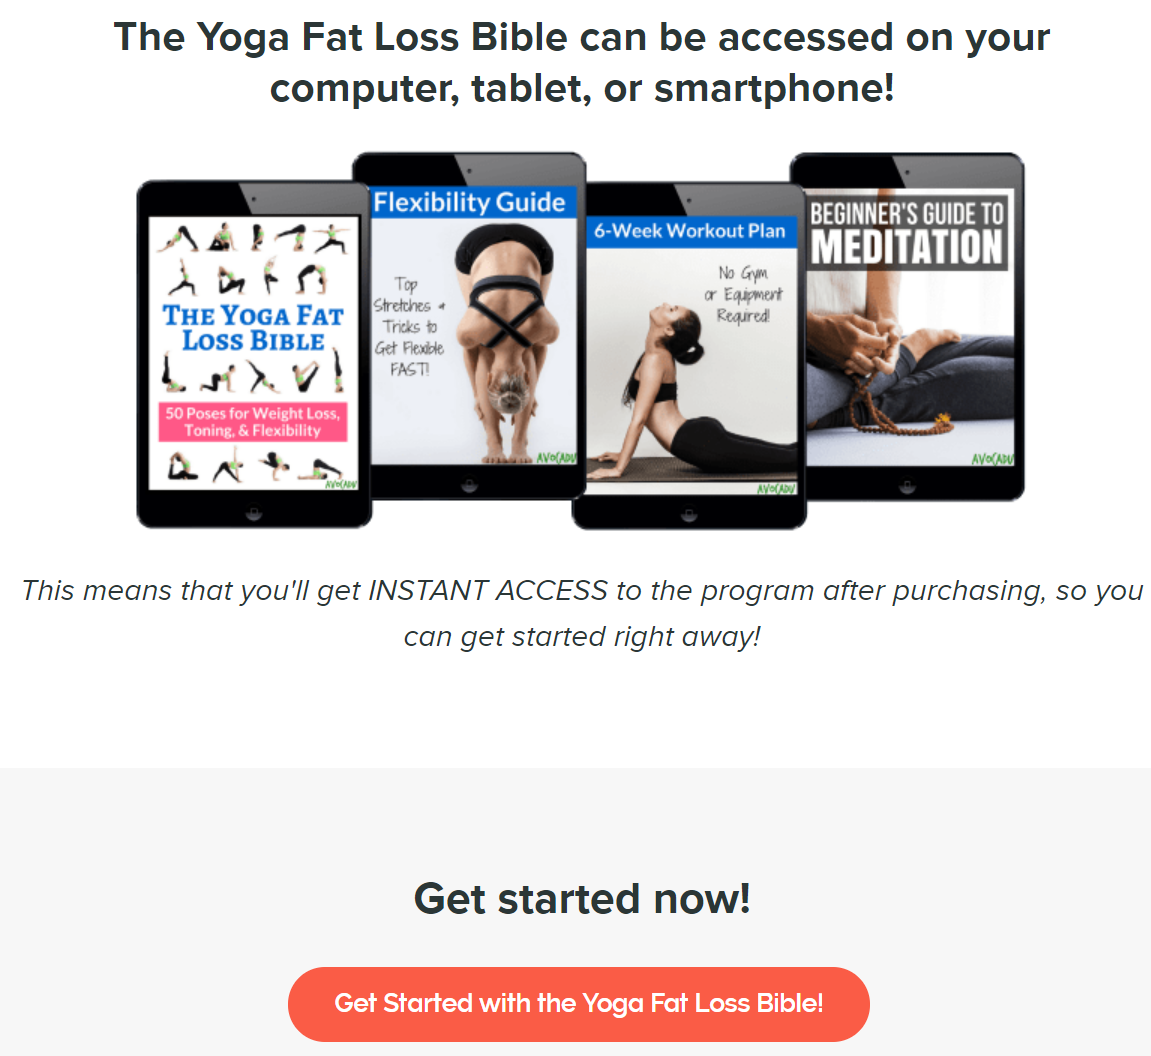 Work from home jobs - Yoga Fat loss bible